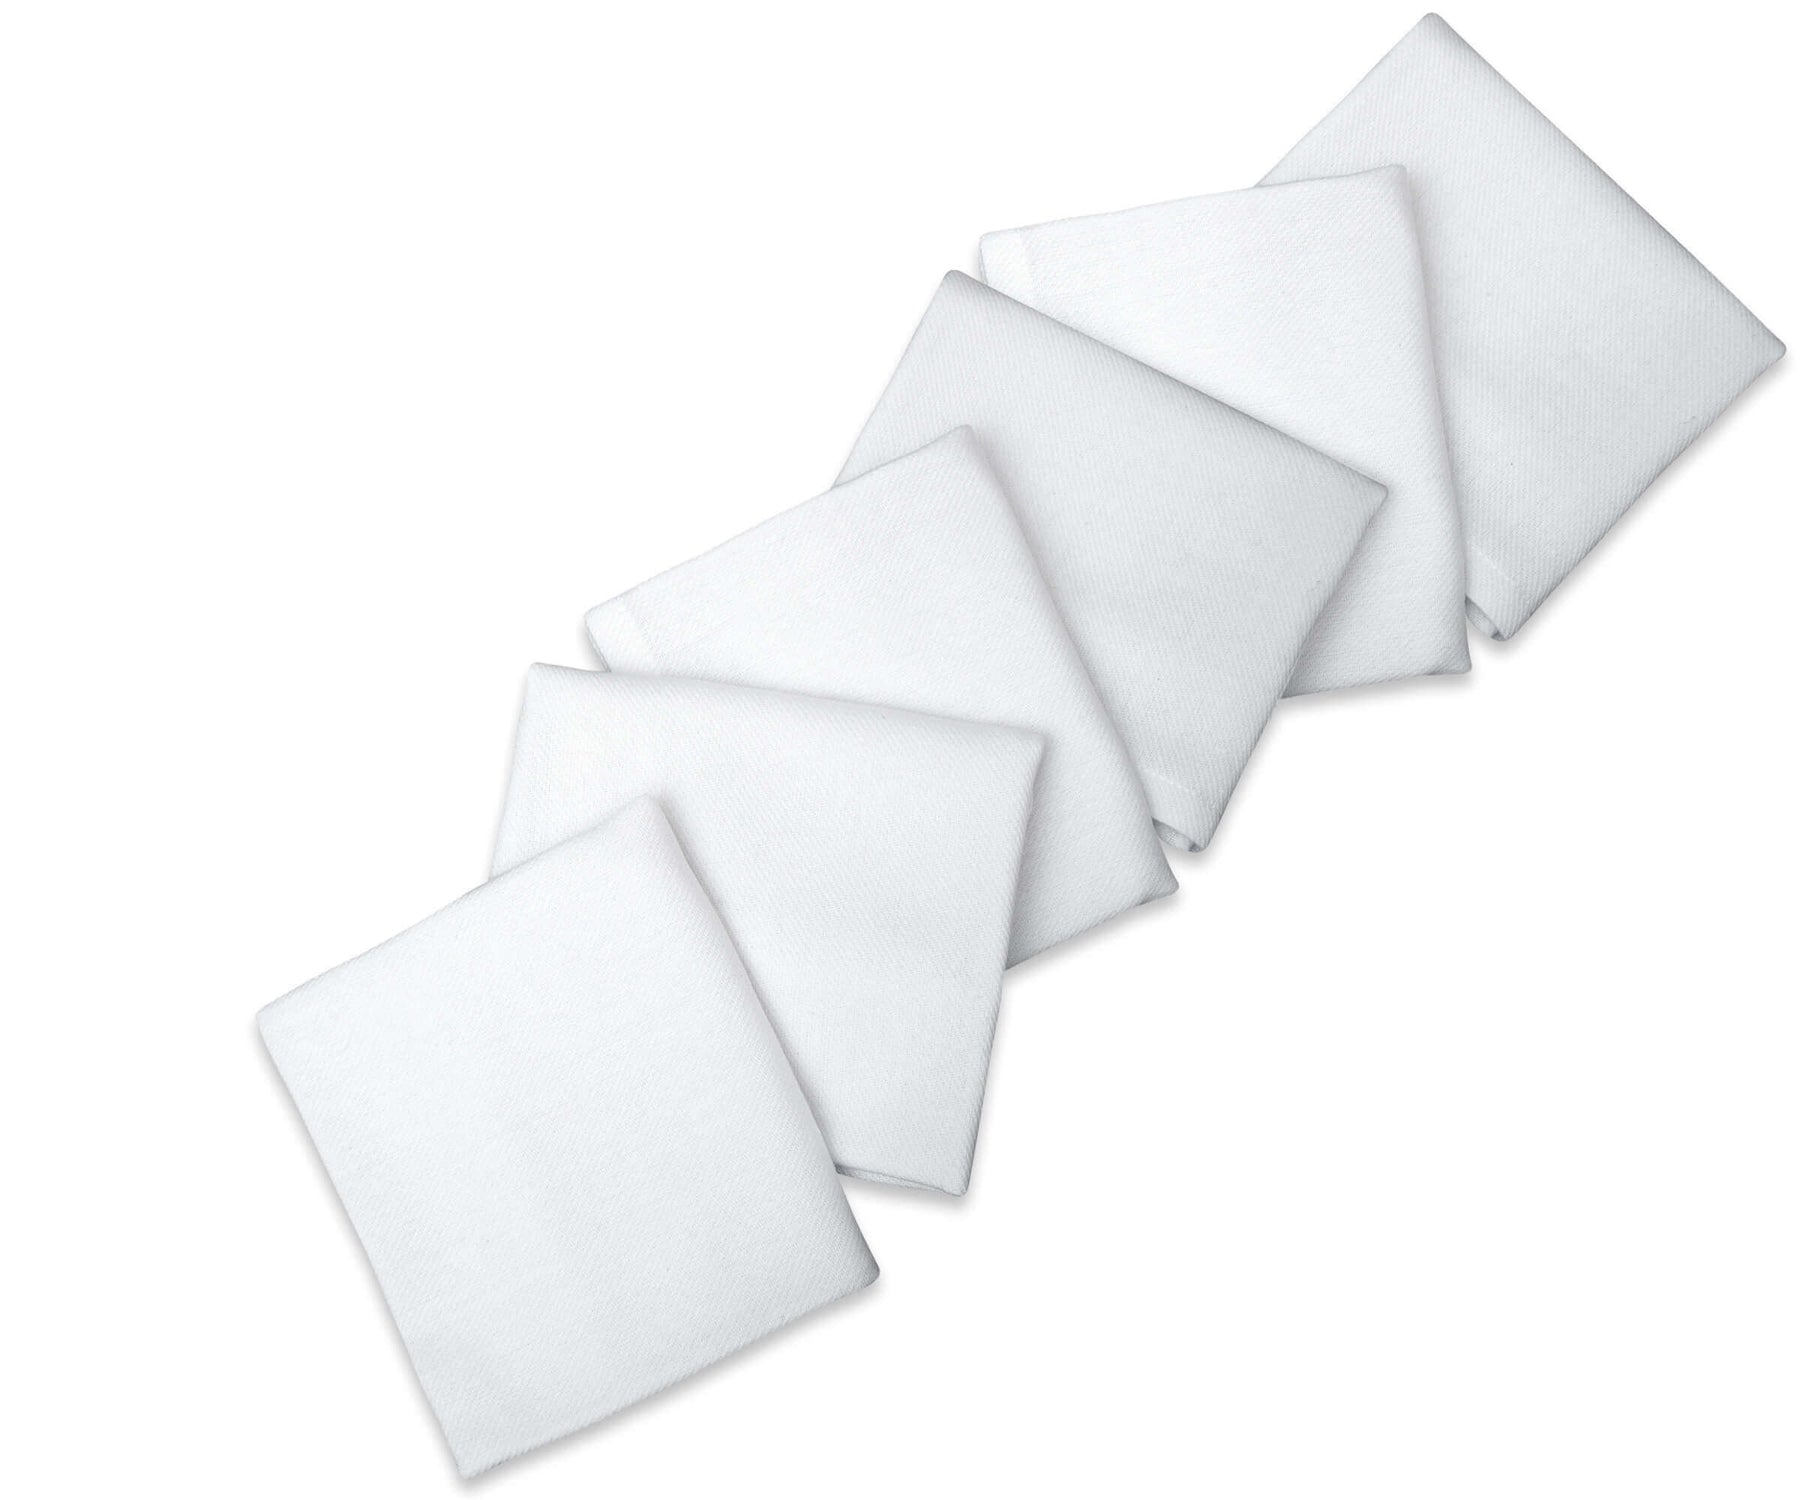 White cloth napkins colored with 1" borders are arranged alternately on the floor.